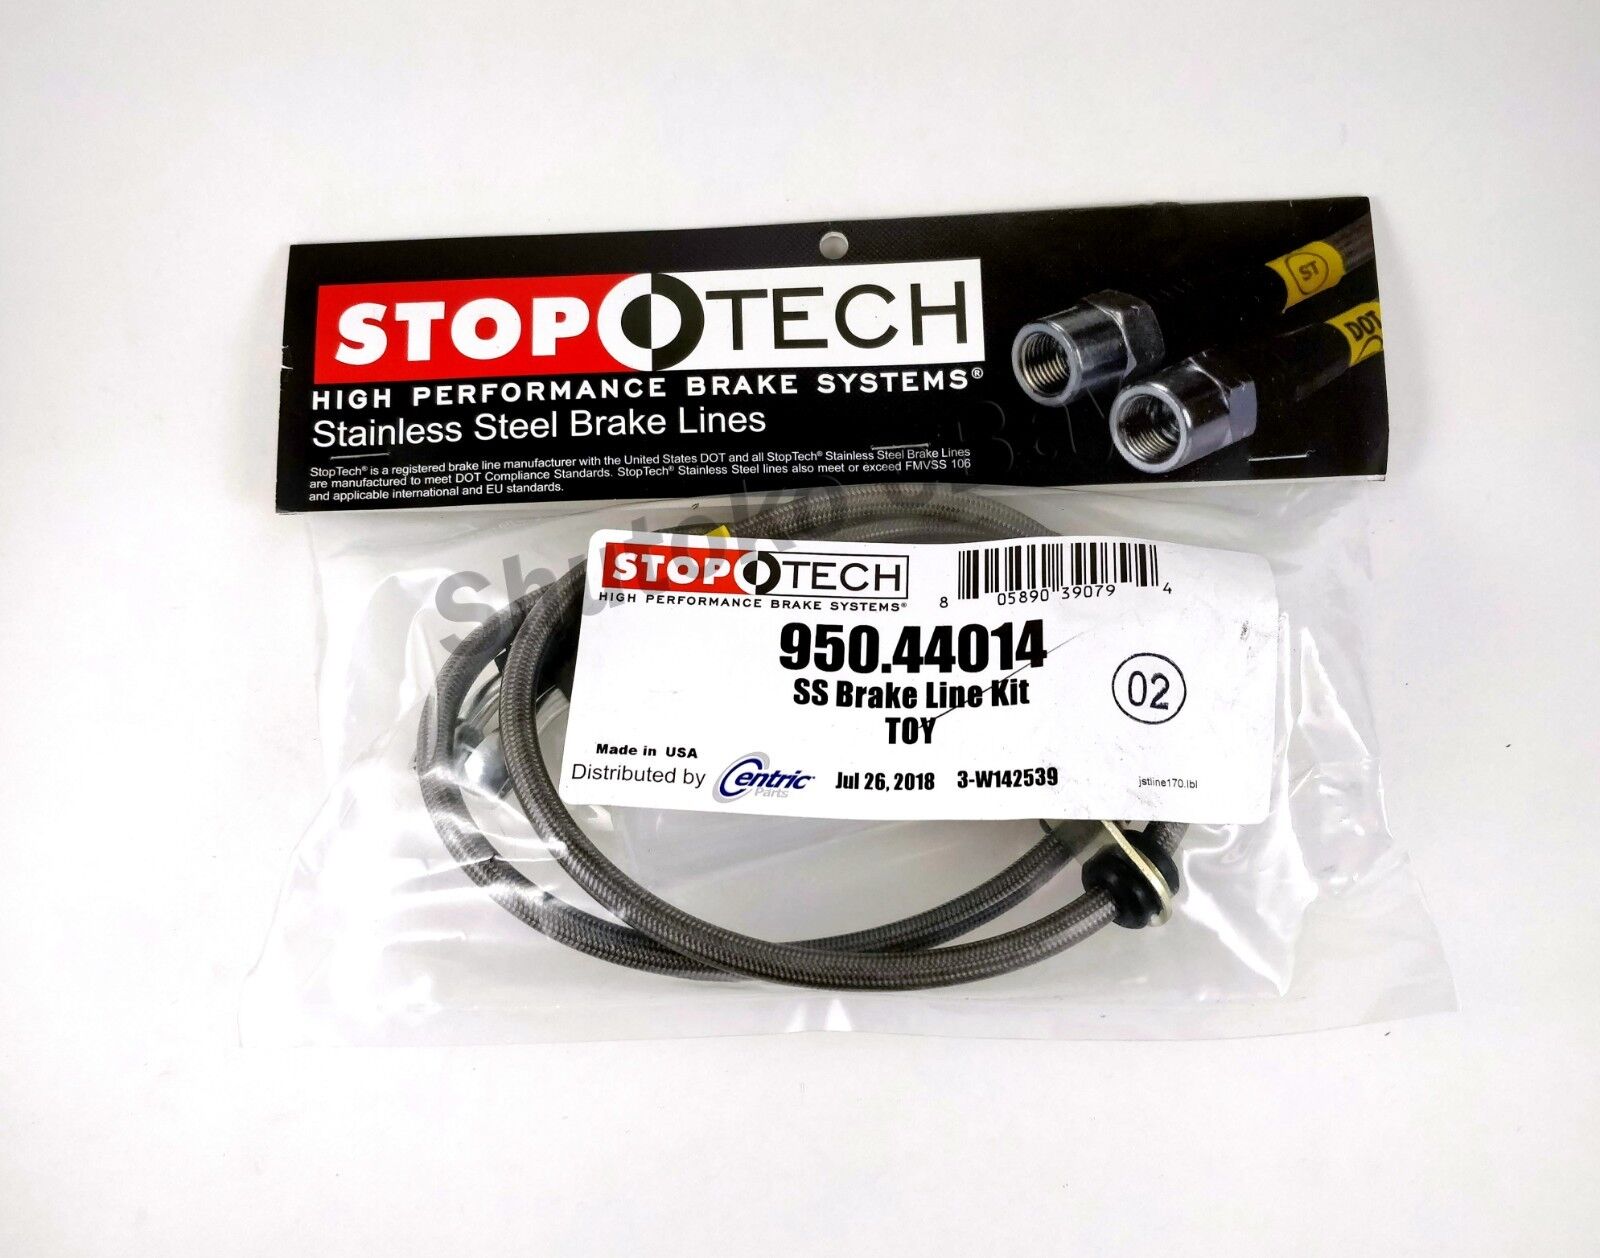 STOPTECH STAINLESS STEEL FRONT BRAKE LINES FOR 95-04 TOYOTA TACOMA 6 LUG